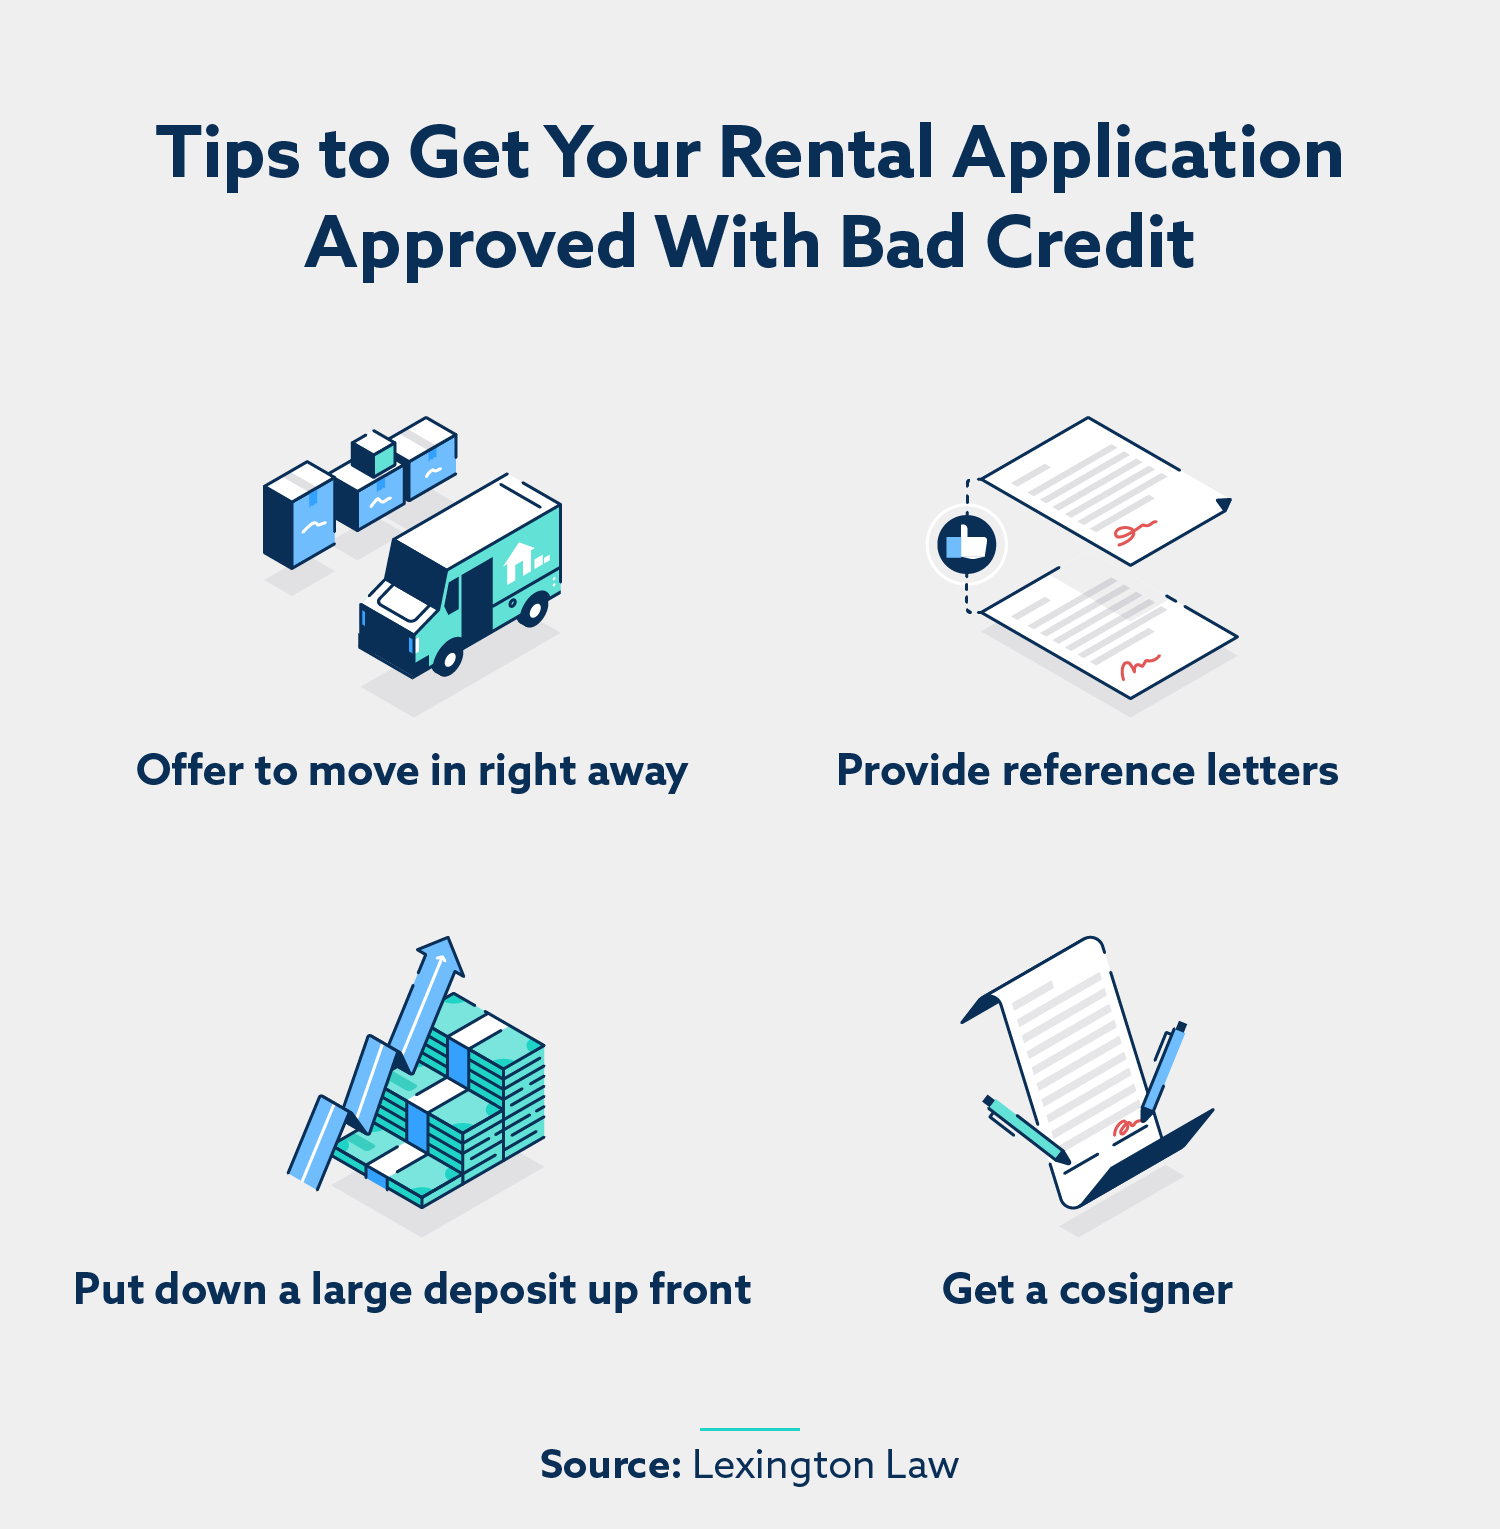 Tips to get rental application approved with bad credit